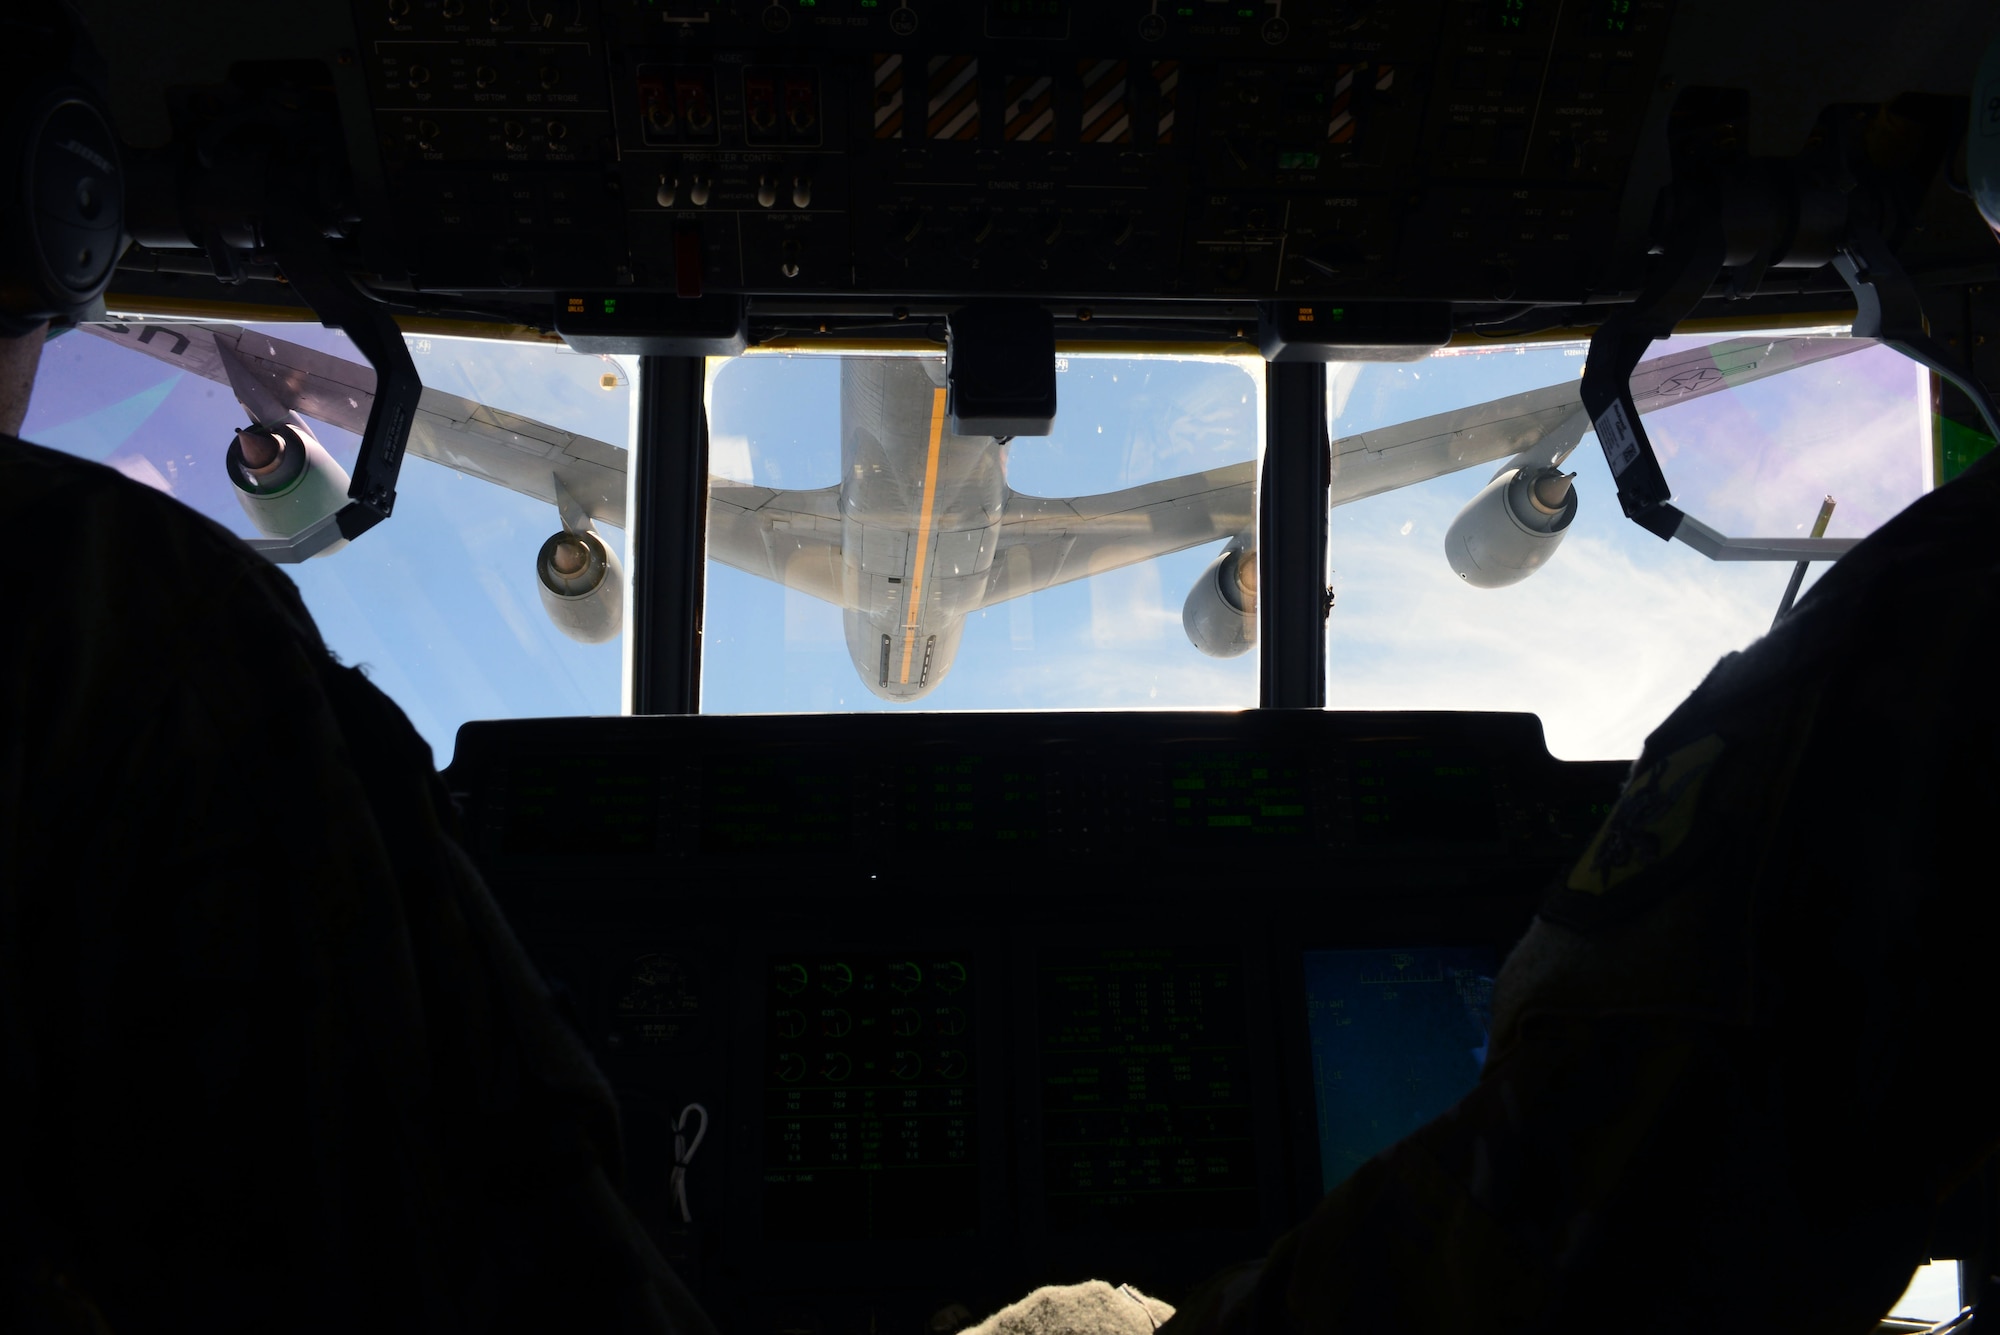 A C-130 Super Hercules prepares to be refueled by a KC-135 Stratotanker during exercise Combat Raider near Ellsworth Air Force Base, S.D., June 28, 2017. The exercise consisted of 22 aircraft from eight military units providing over 100 service members with realistic training scenarios. (U.S. Air Force photo by Airman 1st Class Donald C. Knechtel)